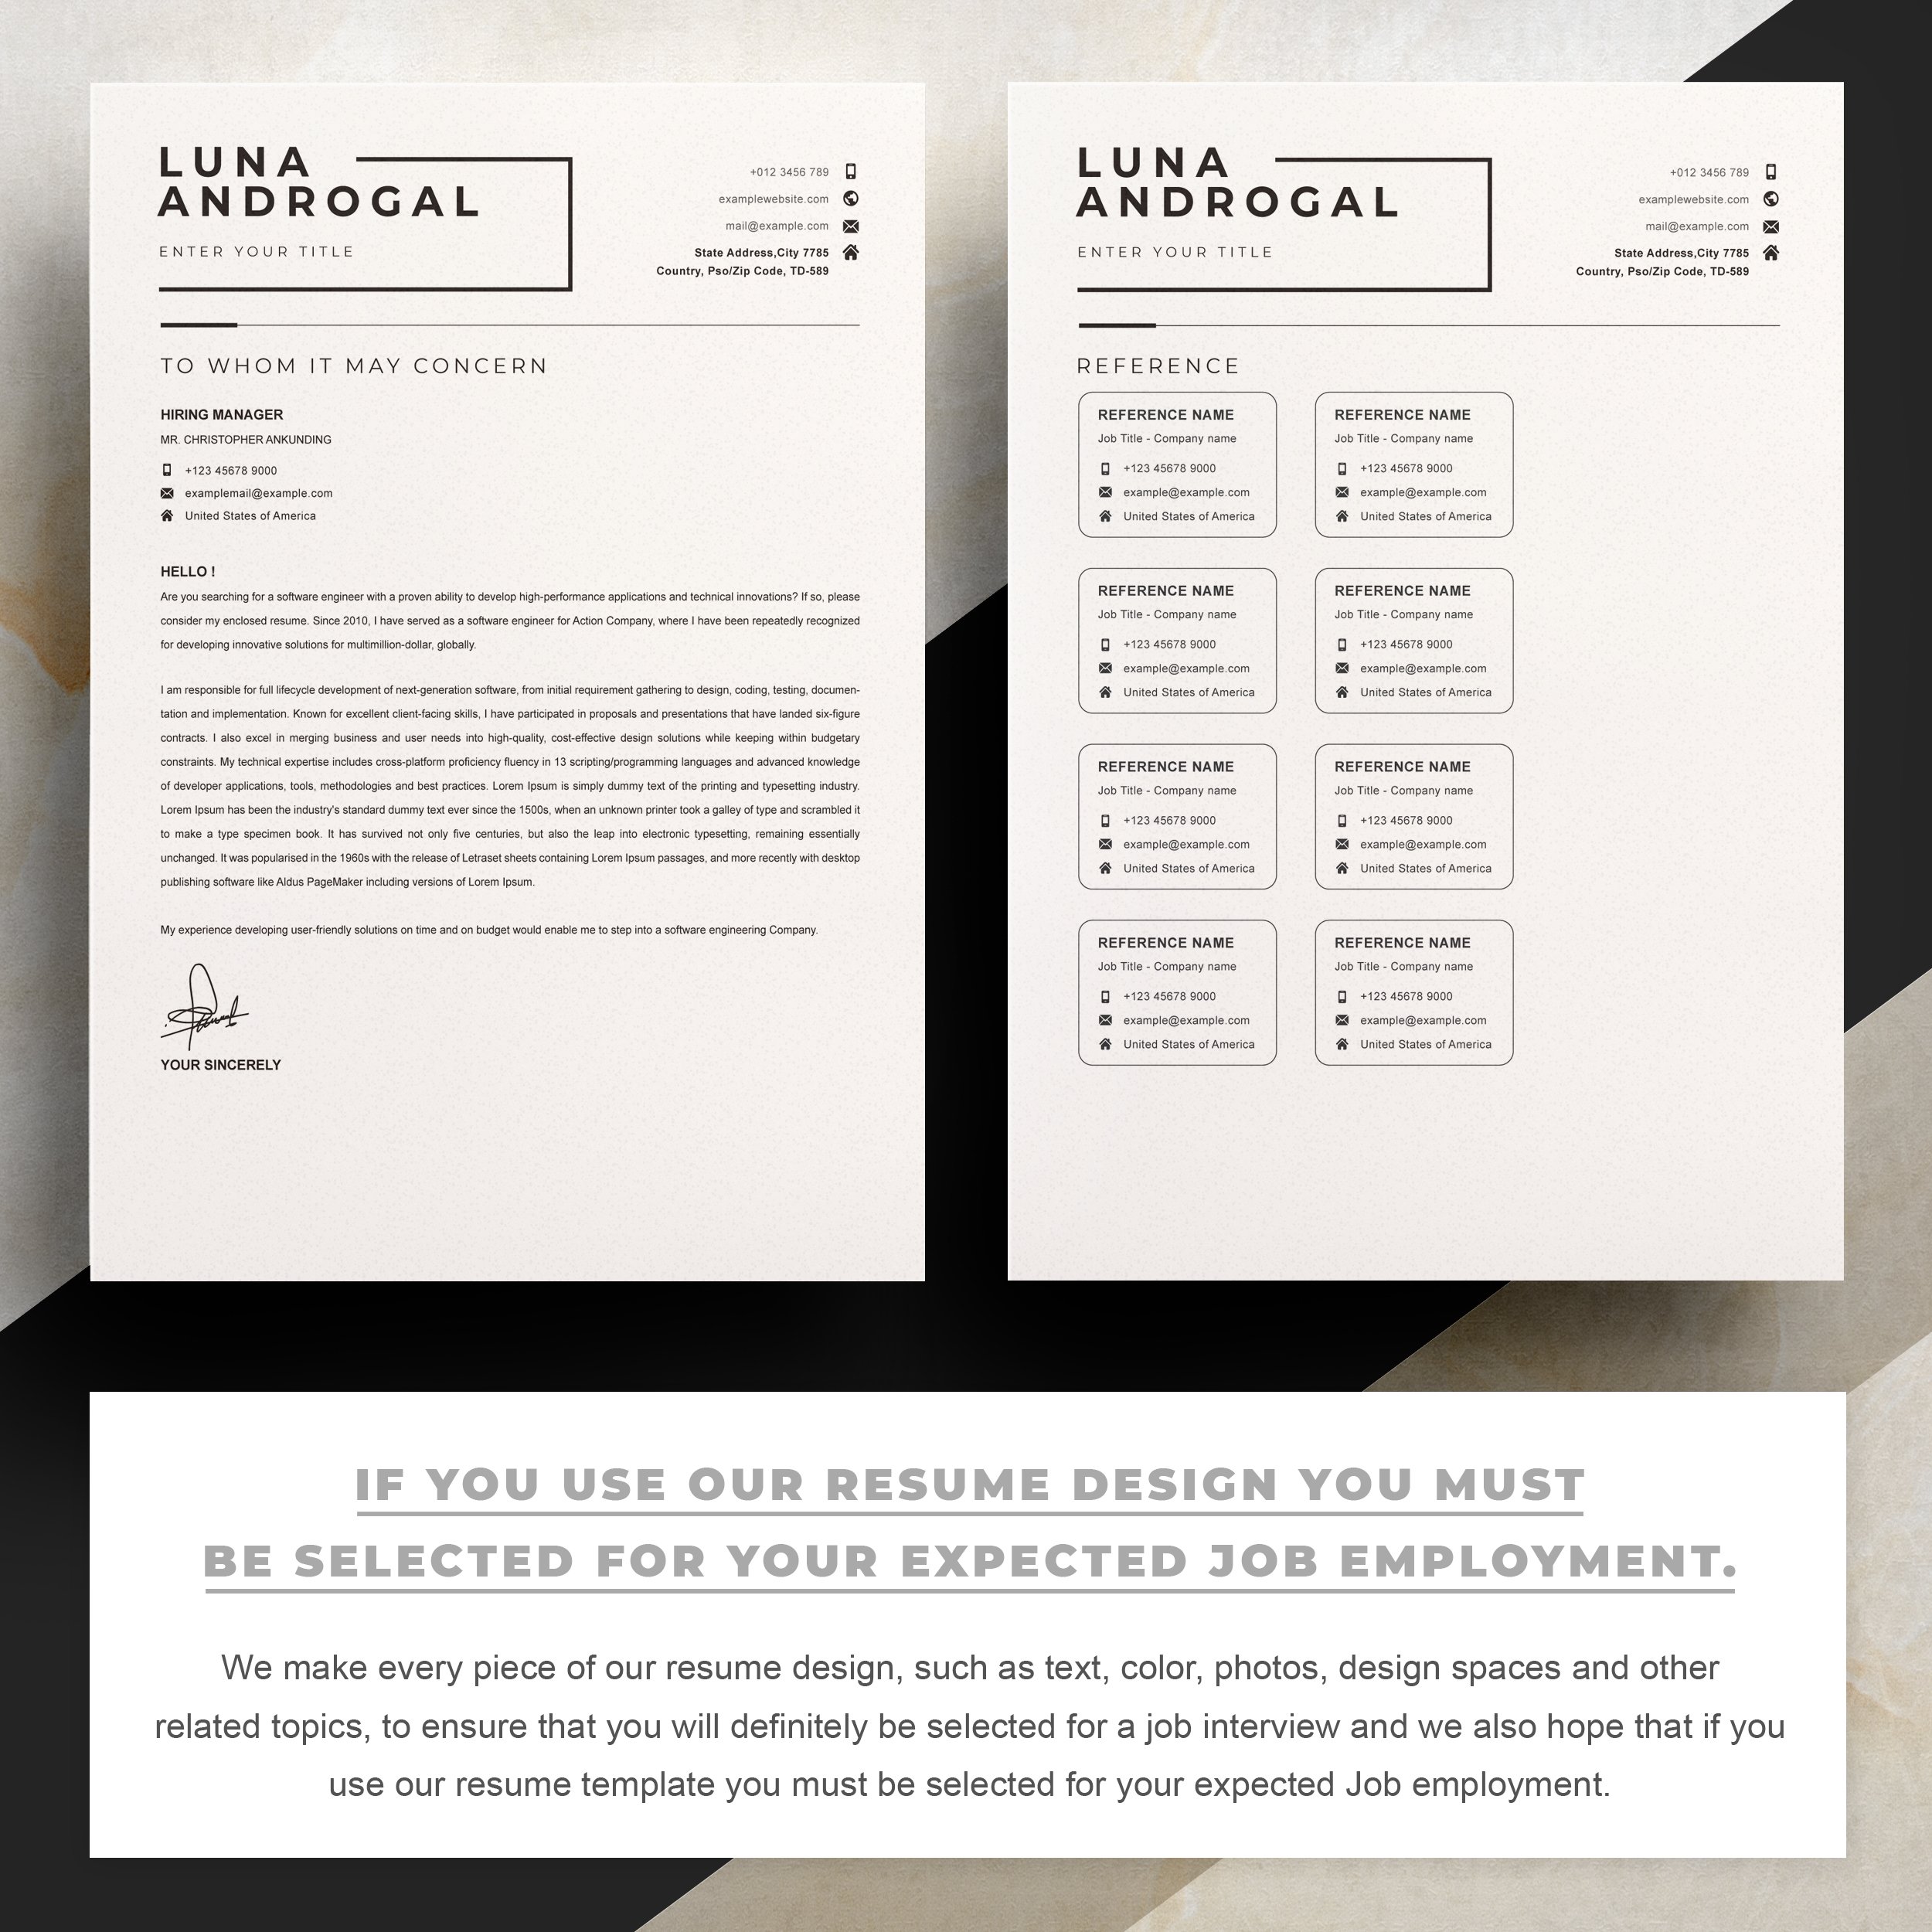 03 2 pages free resume design template 898